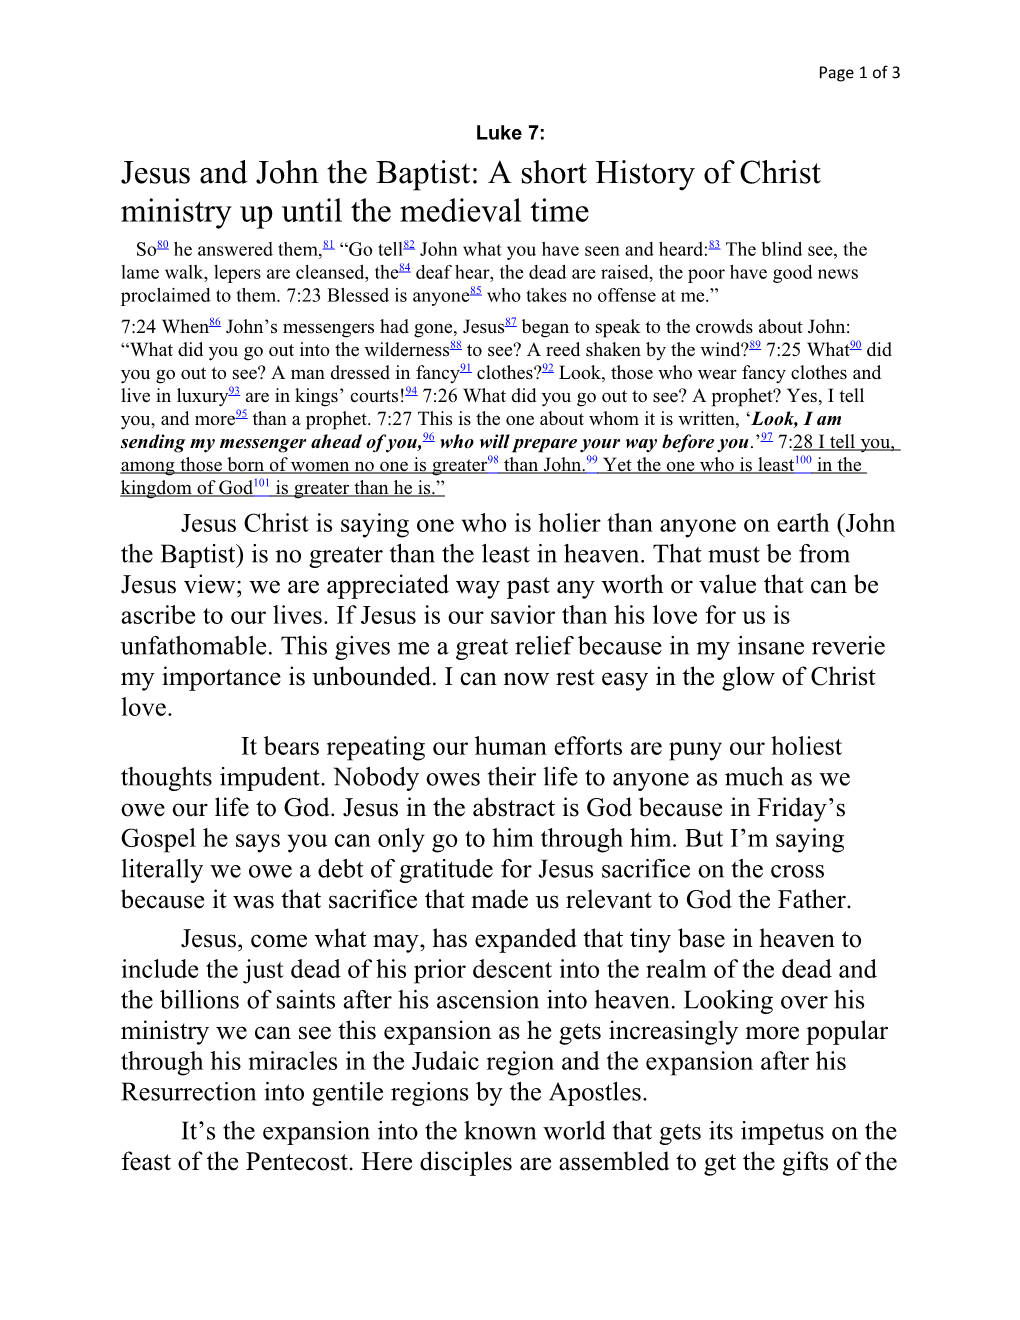 Jesus and John the Baptist: a Short History of Christ Ministry up Until the Medieval Time